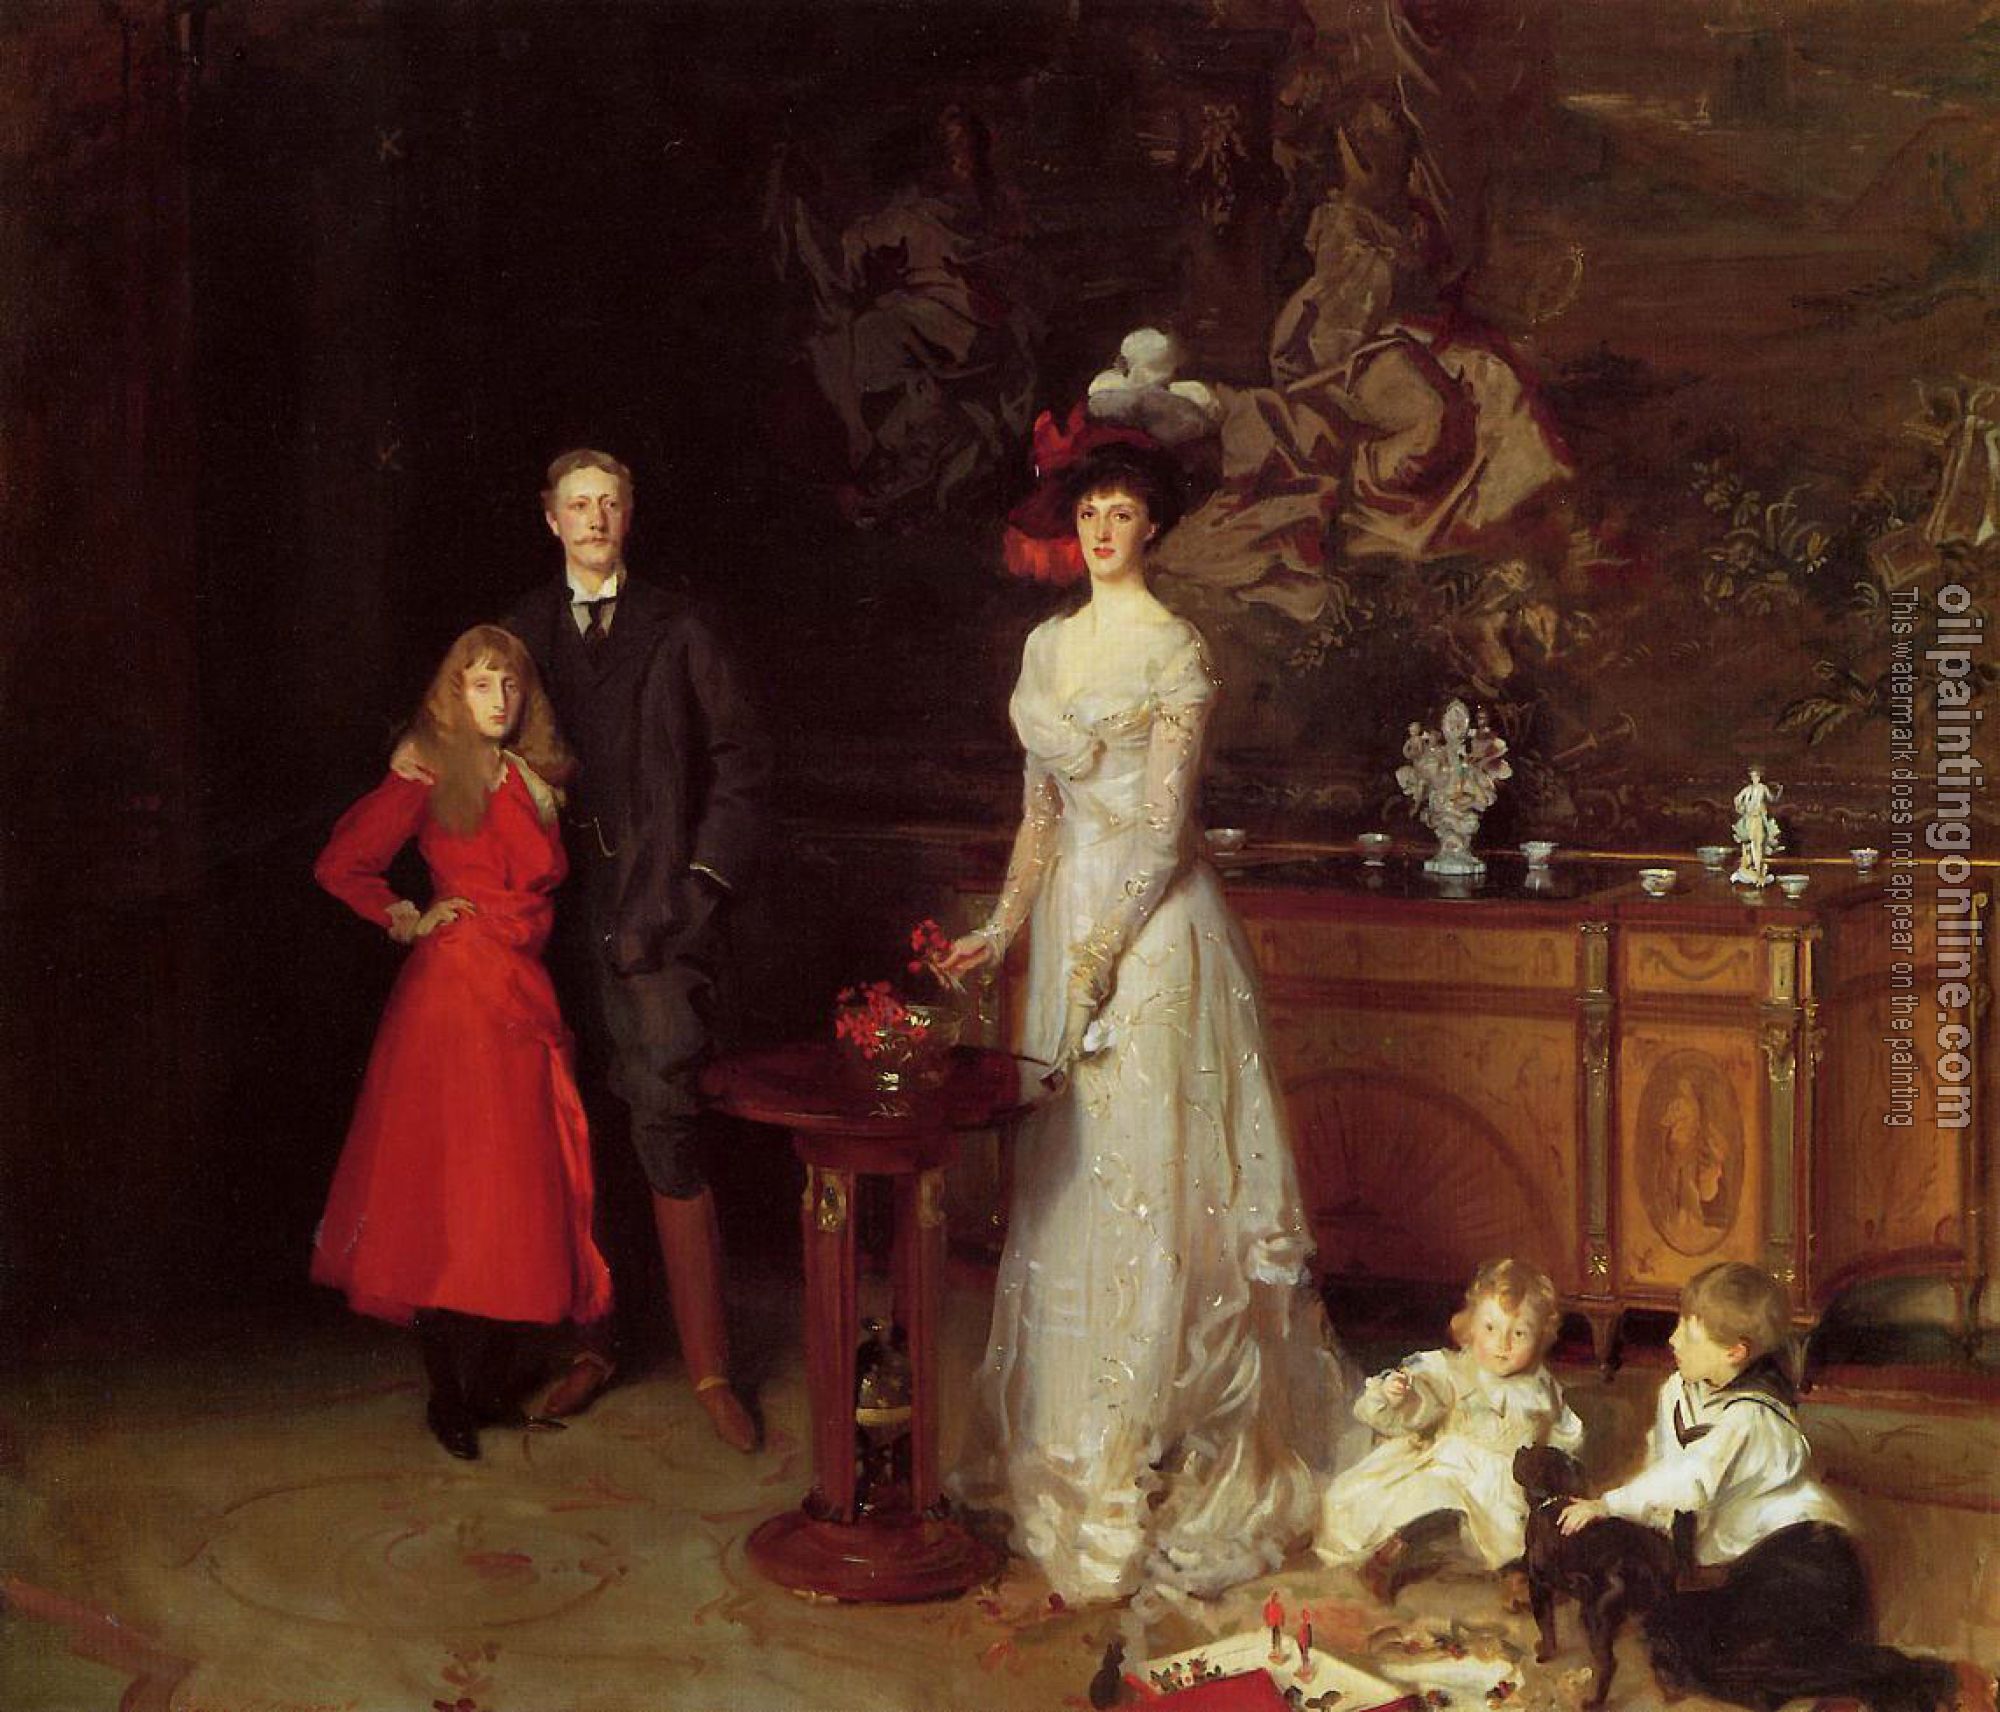 Sargent, John Singer - Sir George Sitwell, Lady Ida Sitwell and Family